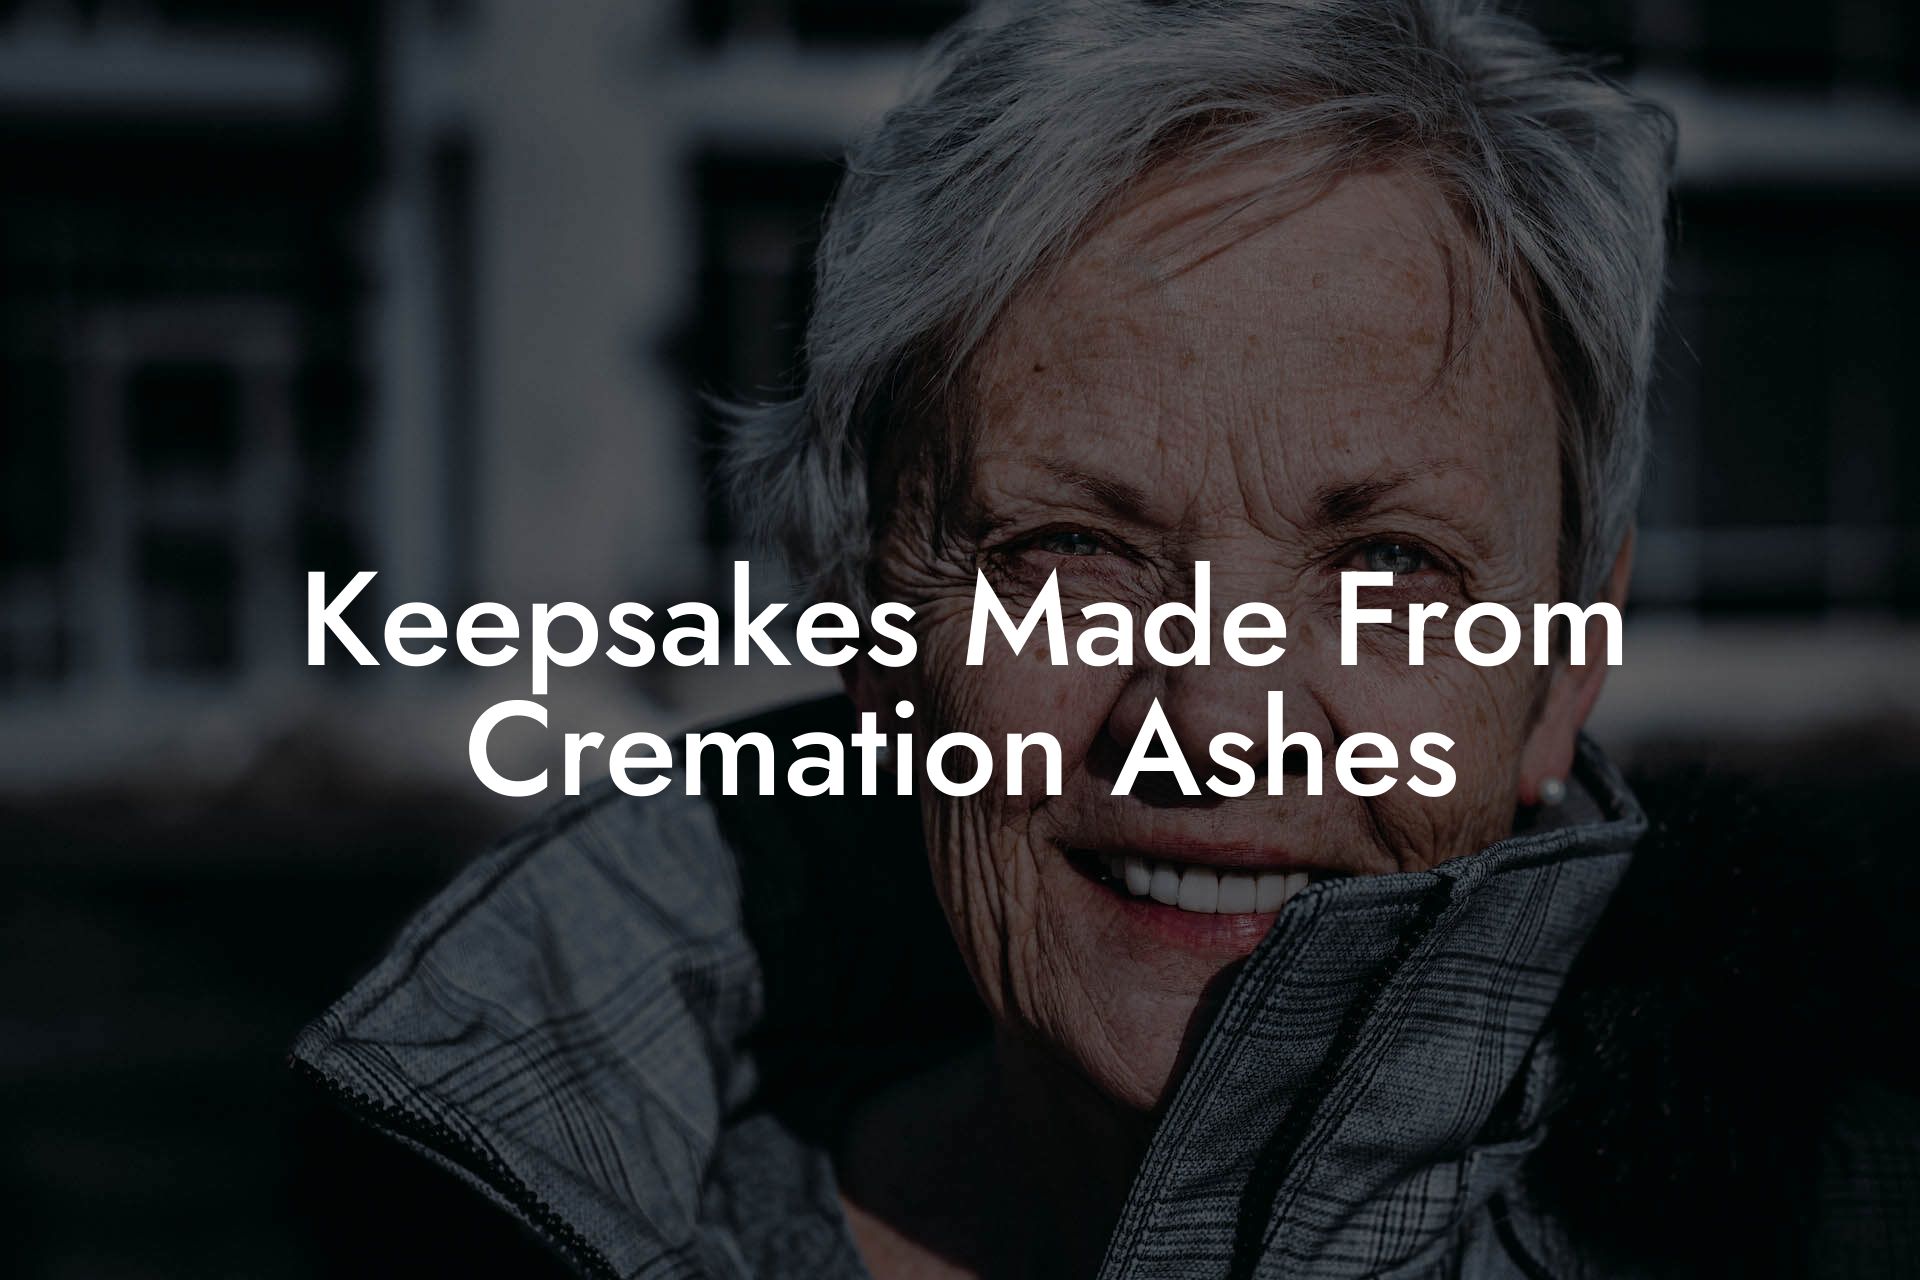 Keepsakes Made From Cremation Ashes